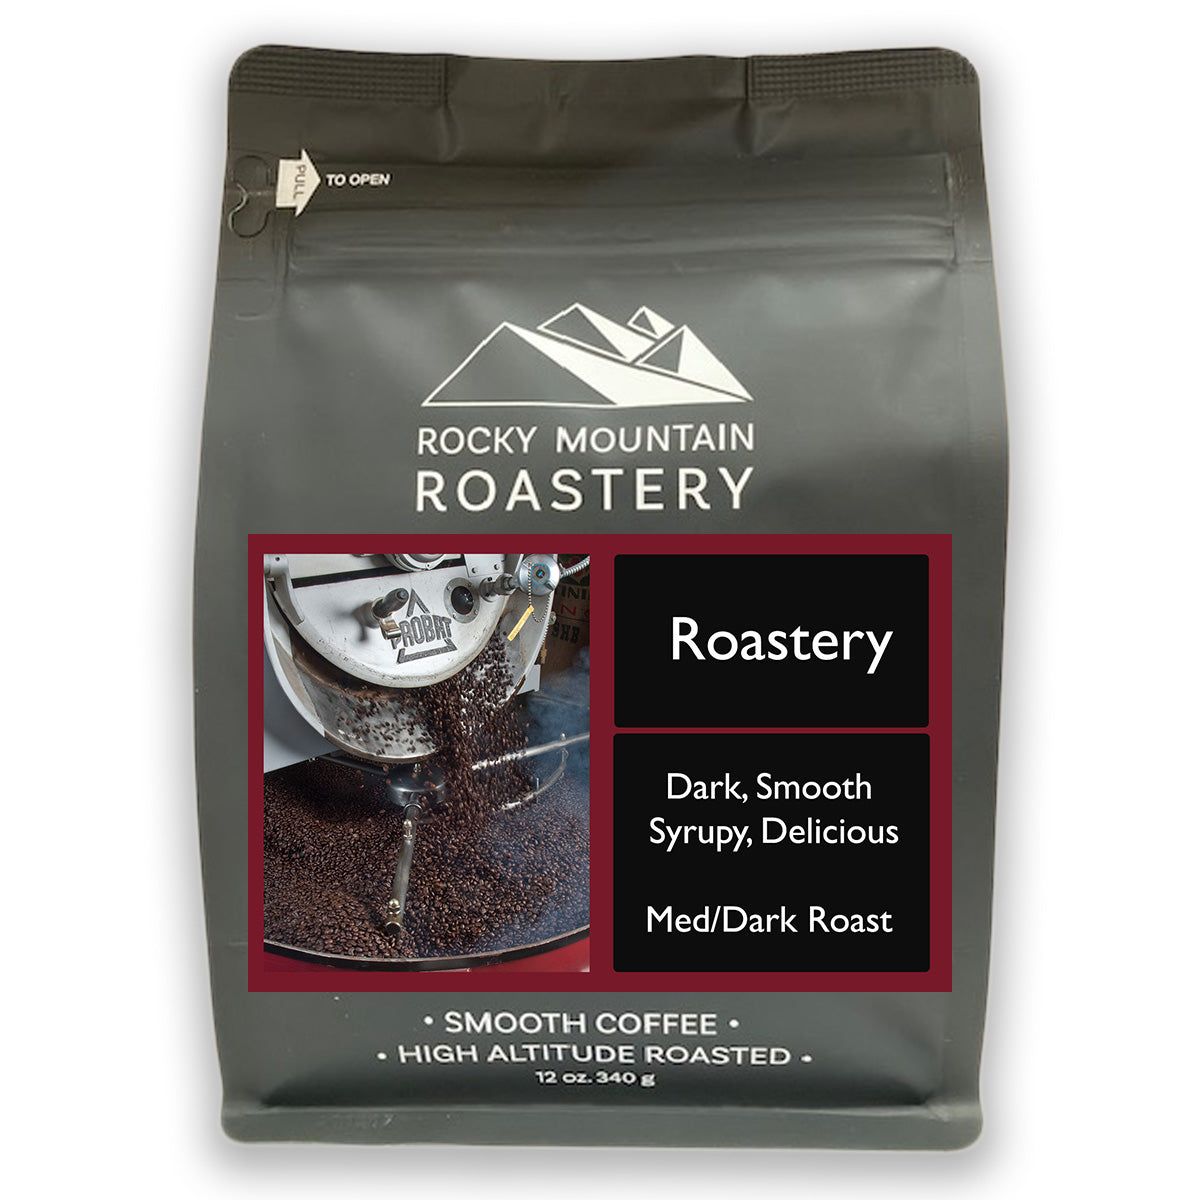 Picture of a bag of Roastery Blend Coffee